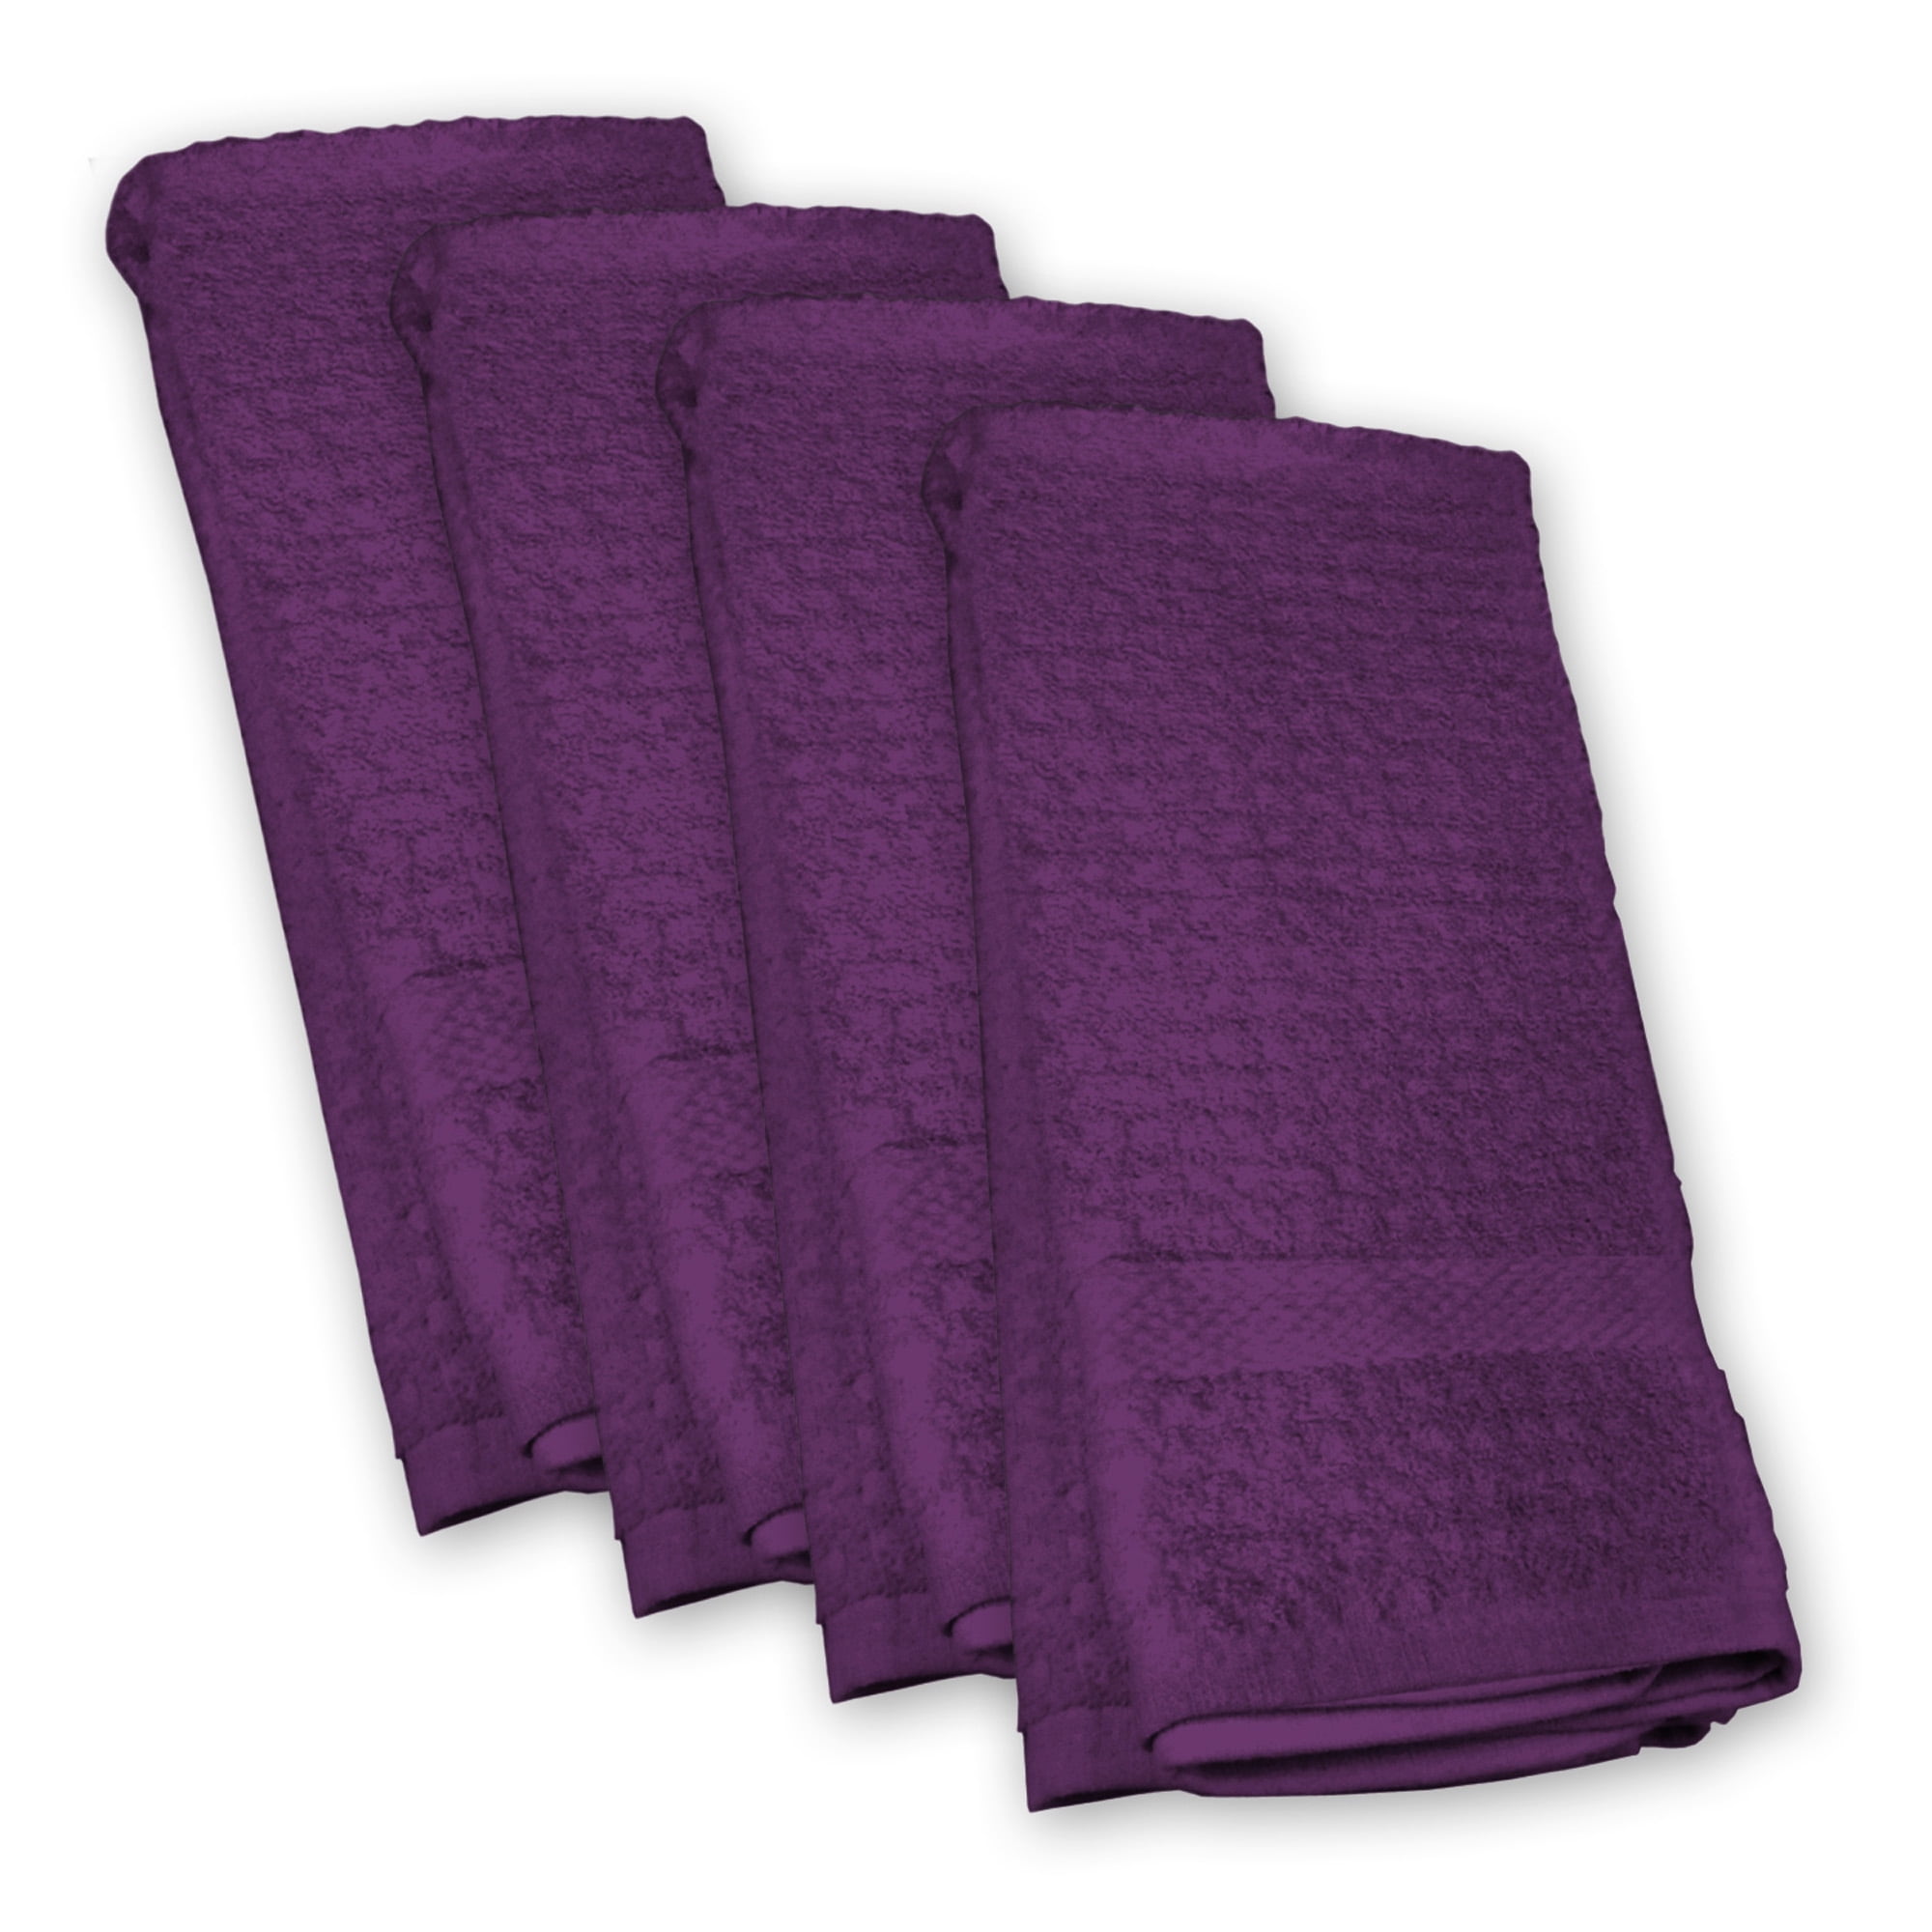 Double Layer Striped Dishcloths - Purple (Set of 4)